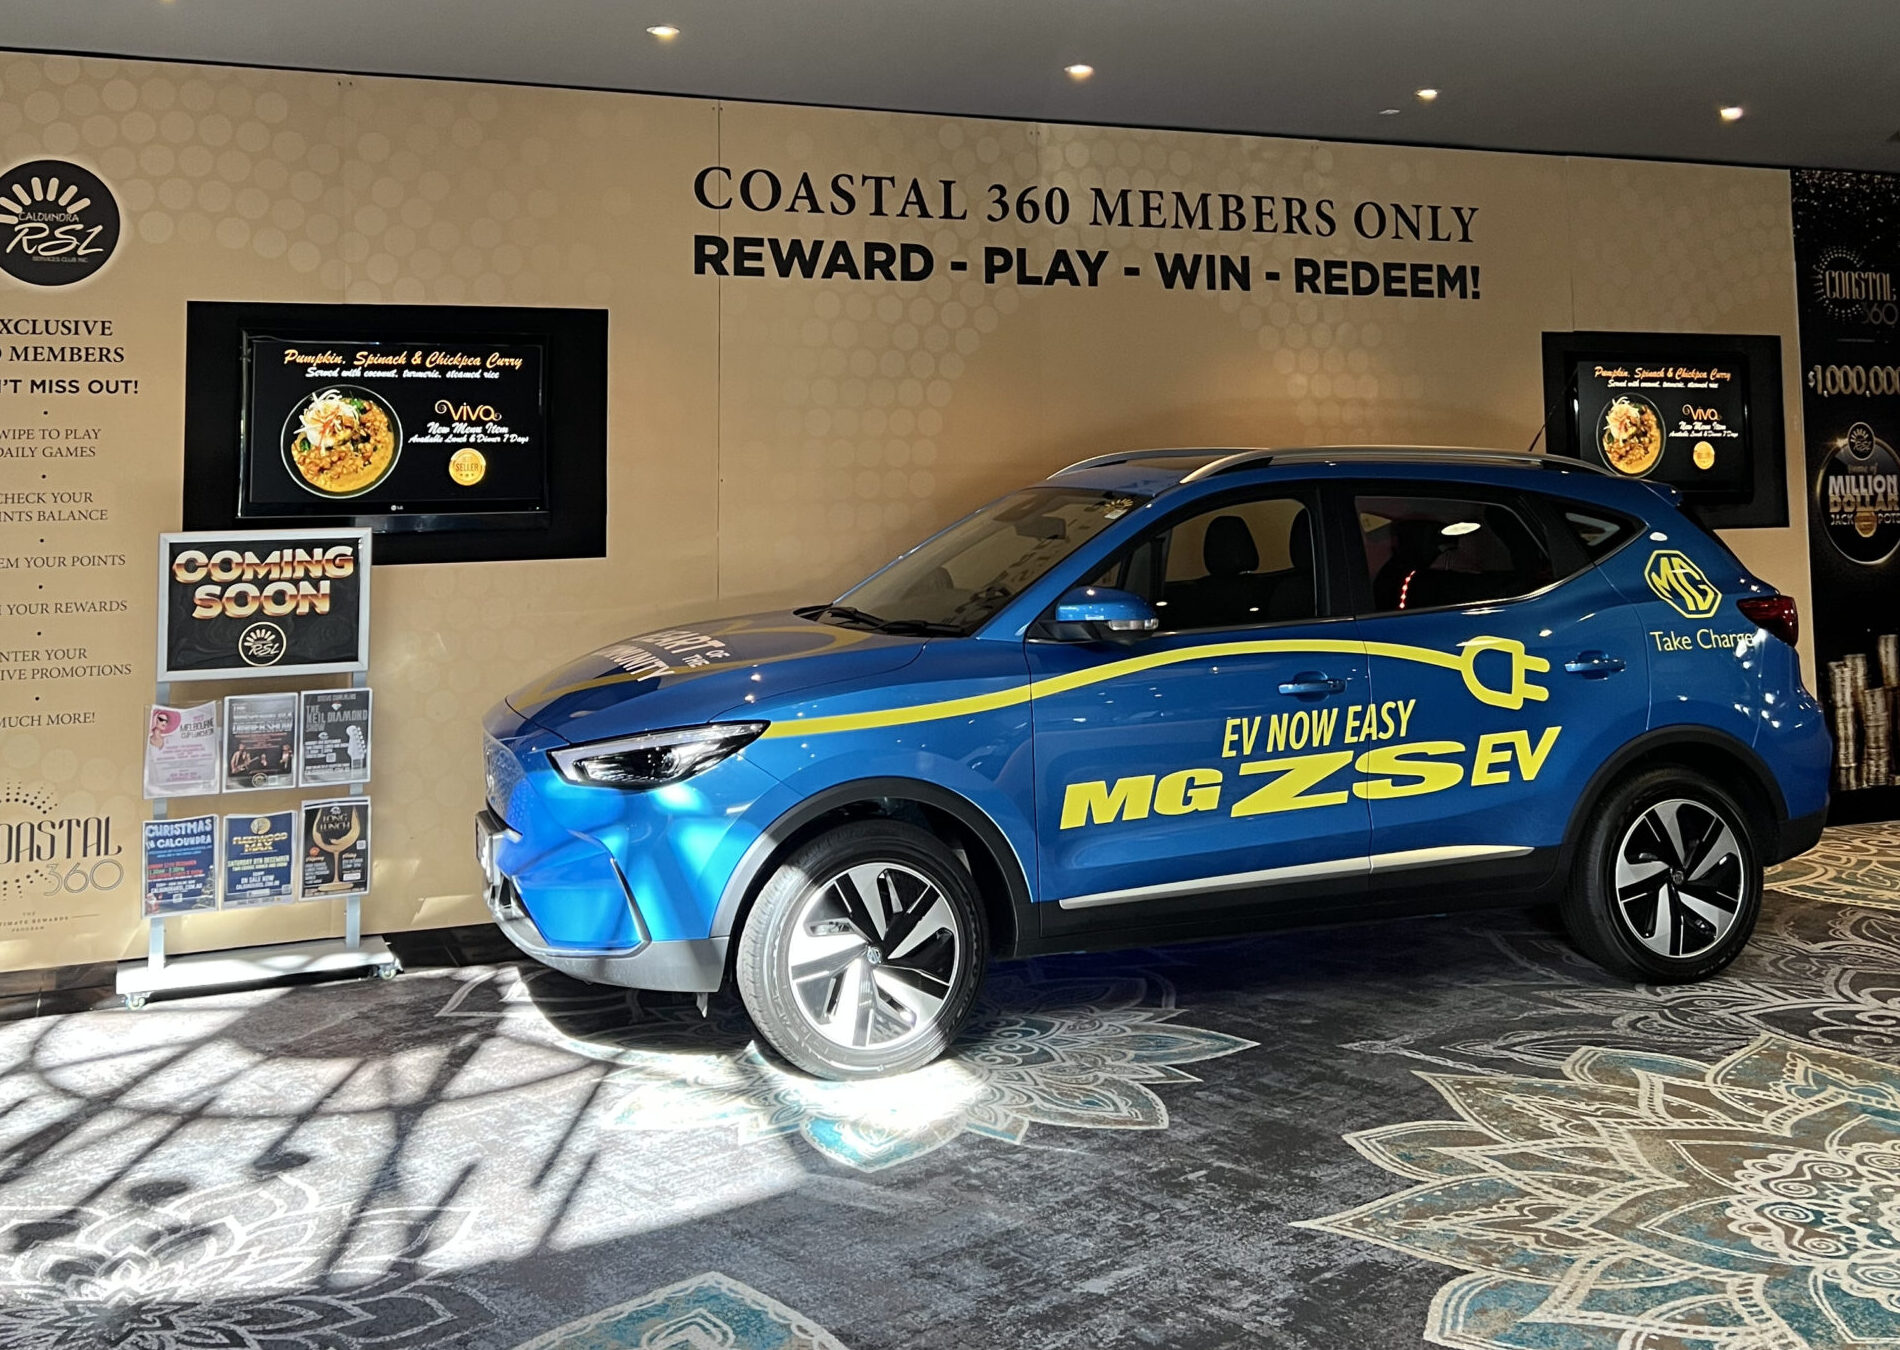 Caloundra RSL competition prize - an electric car.